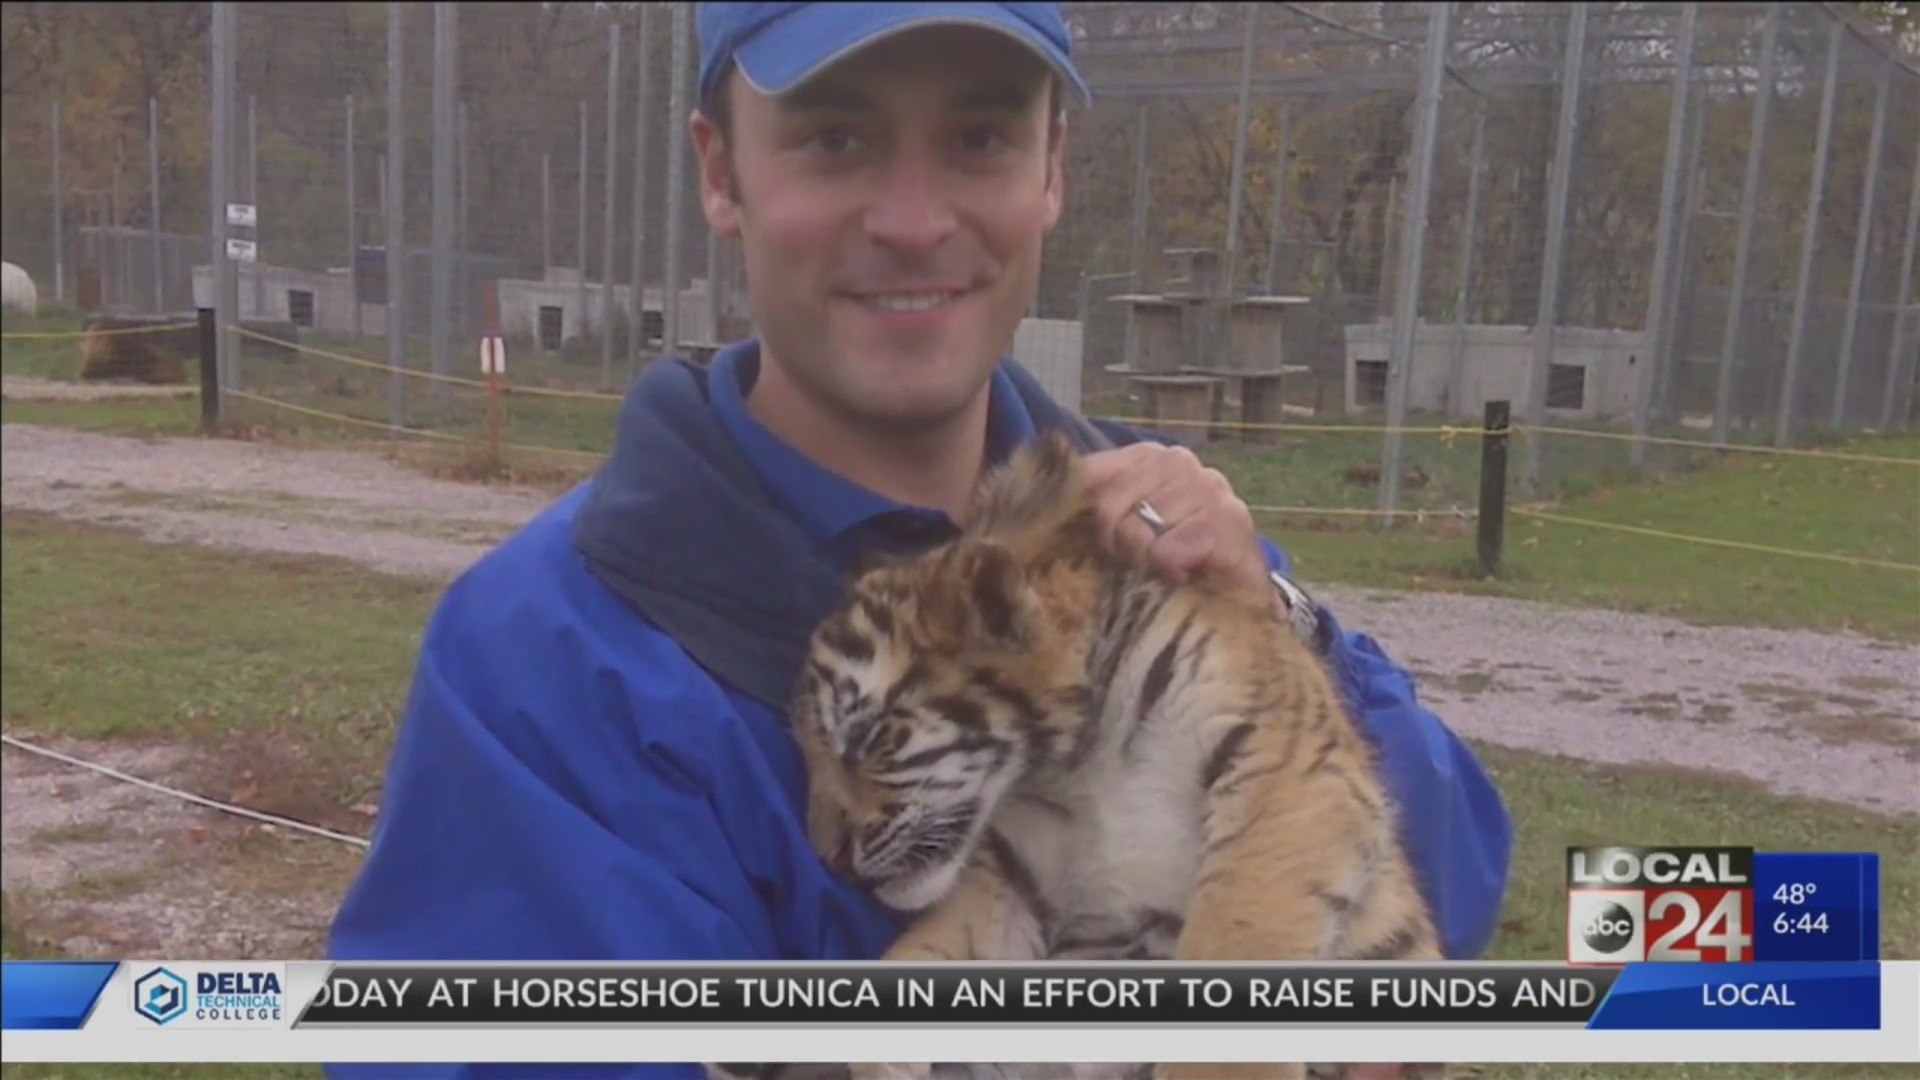 Memphis' TOM the Tiger: the bond between cat and his human